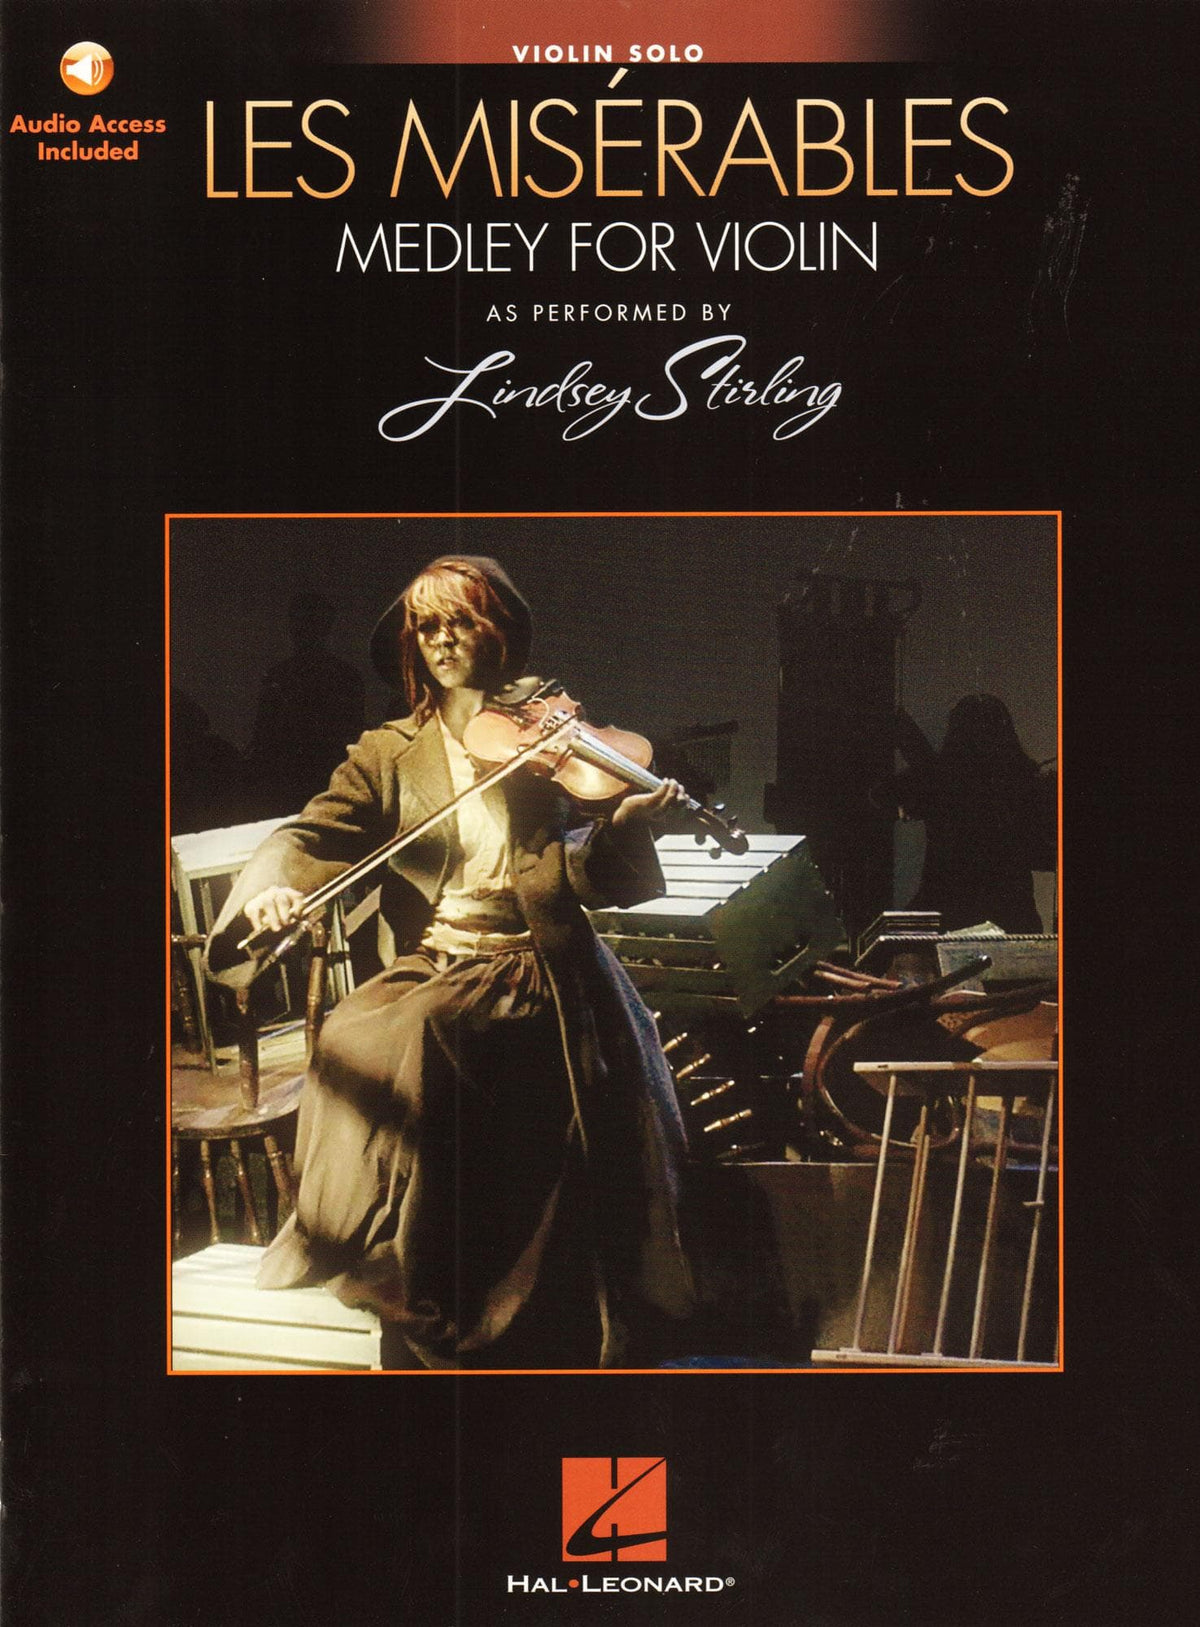 Les Misérables - Medley for Violin with Audio Accompaniment - as Performed by Lindsey Stirling - Hal Leonard